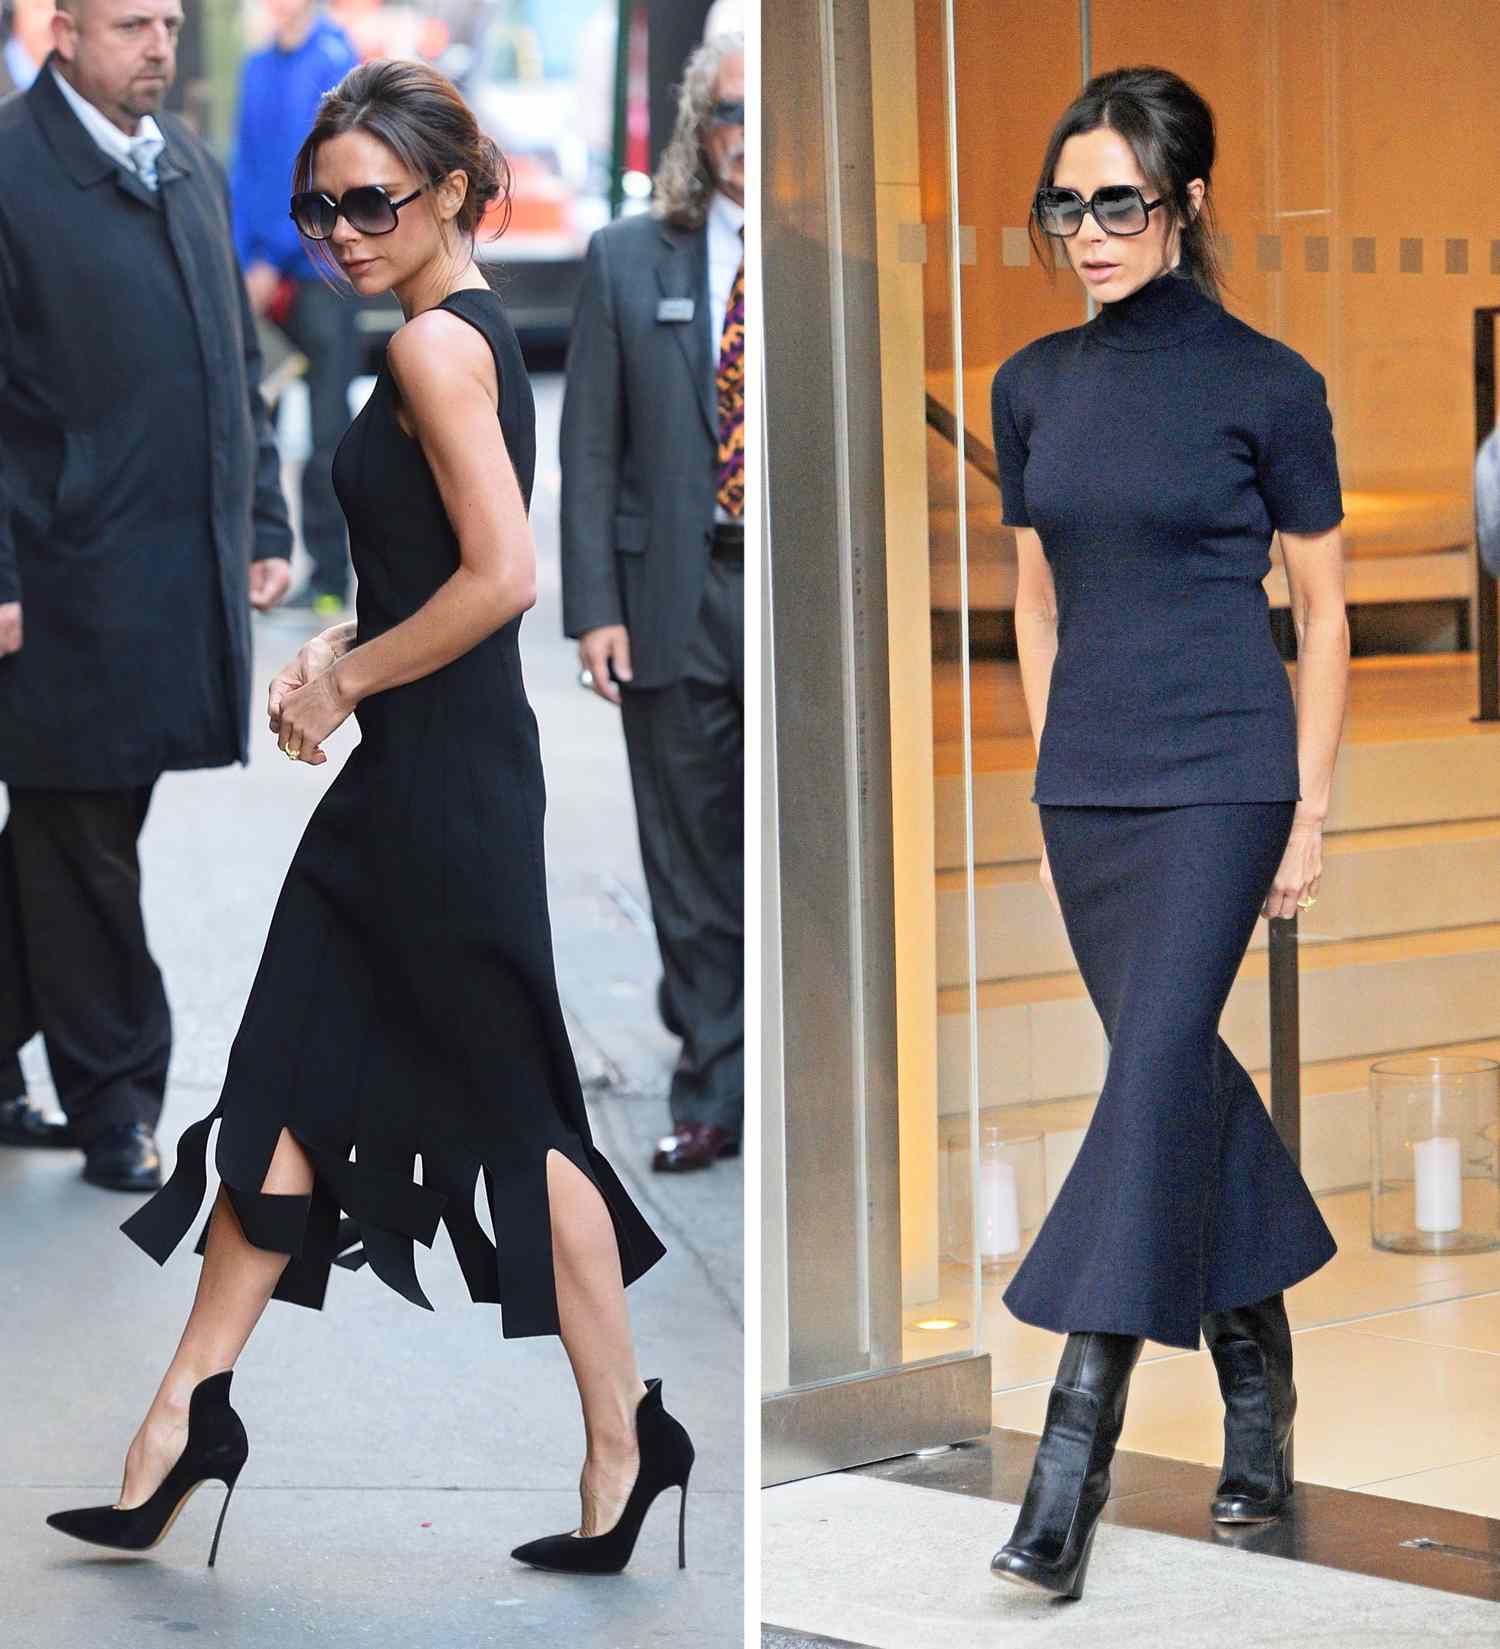 Victoria Beckham walking with 2 different styles